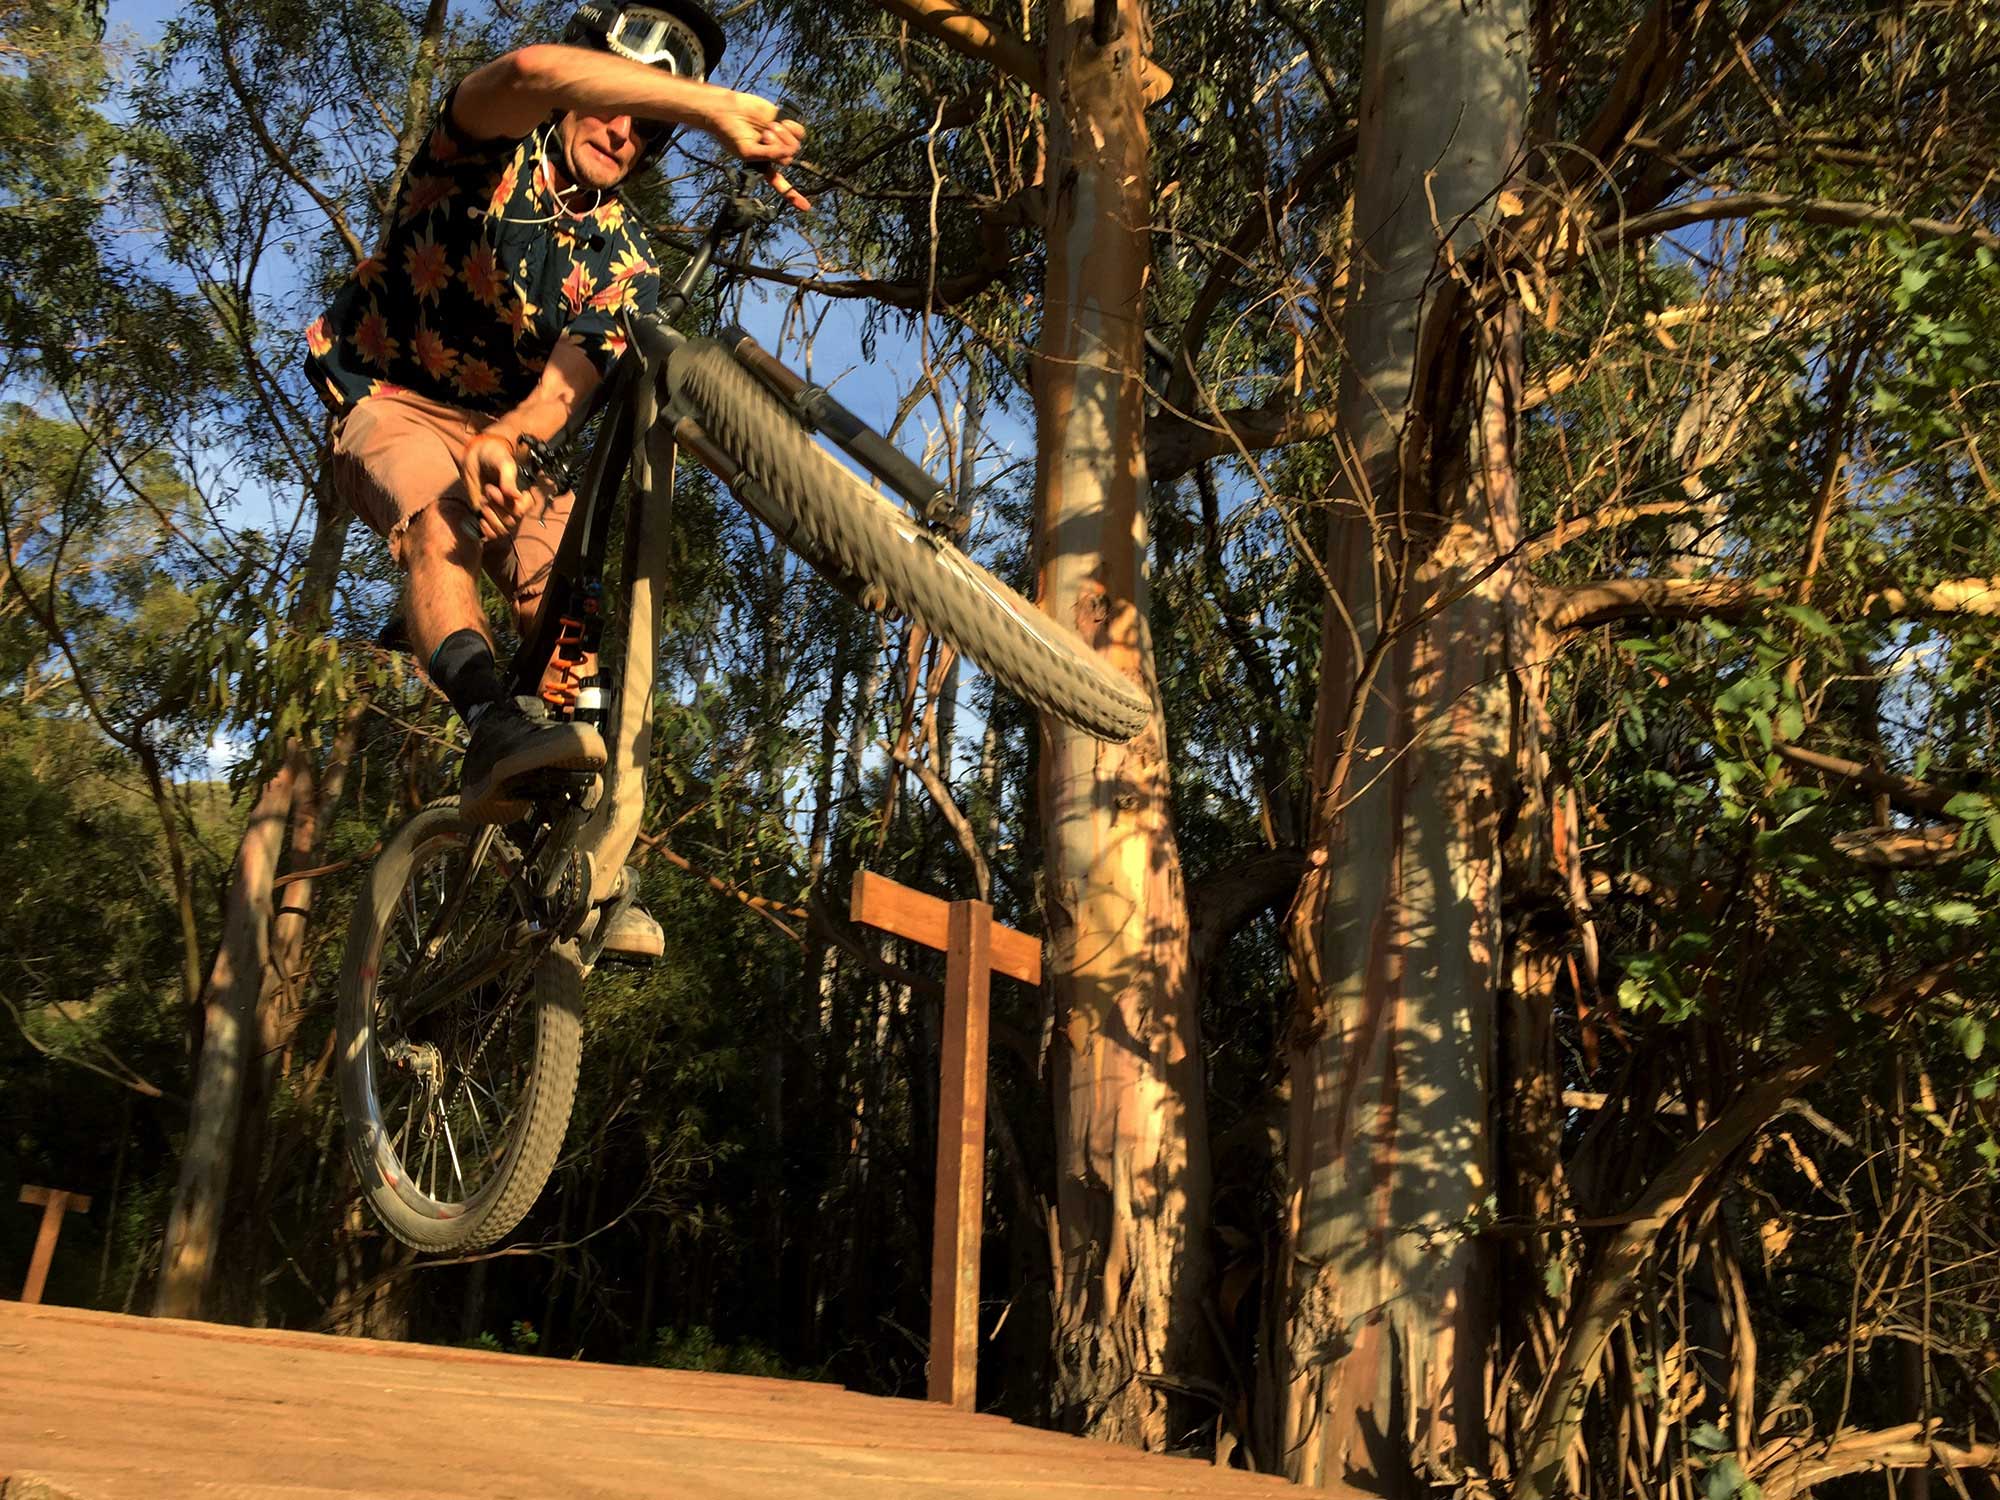 Oct. 7, 2016 – Trevor Roland, a Cal Poly Cycling alumni, performs a bar twist in The Eucs section of Poly Canyon. The Eucs is designated for San Luis Obispo’s mountain bikers. It features flow trails, elevated wooden platforms, and jumps. In Roland’s words, 'Hawaii Friday is all smiles. This ride is something else.'